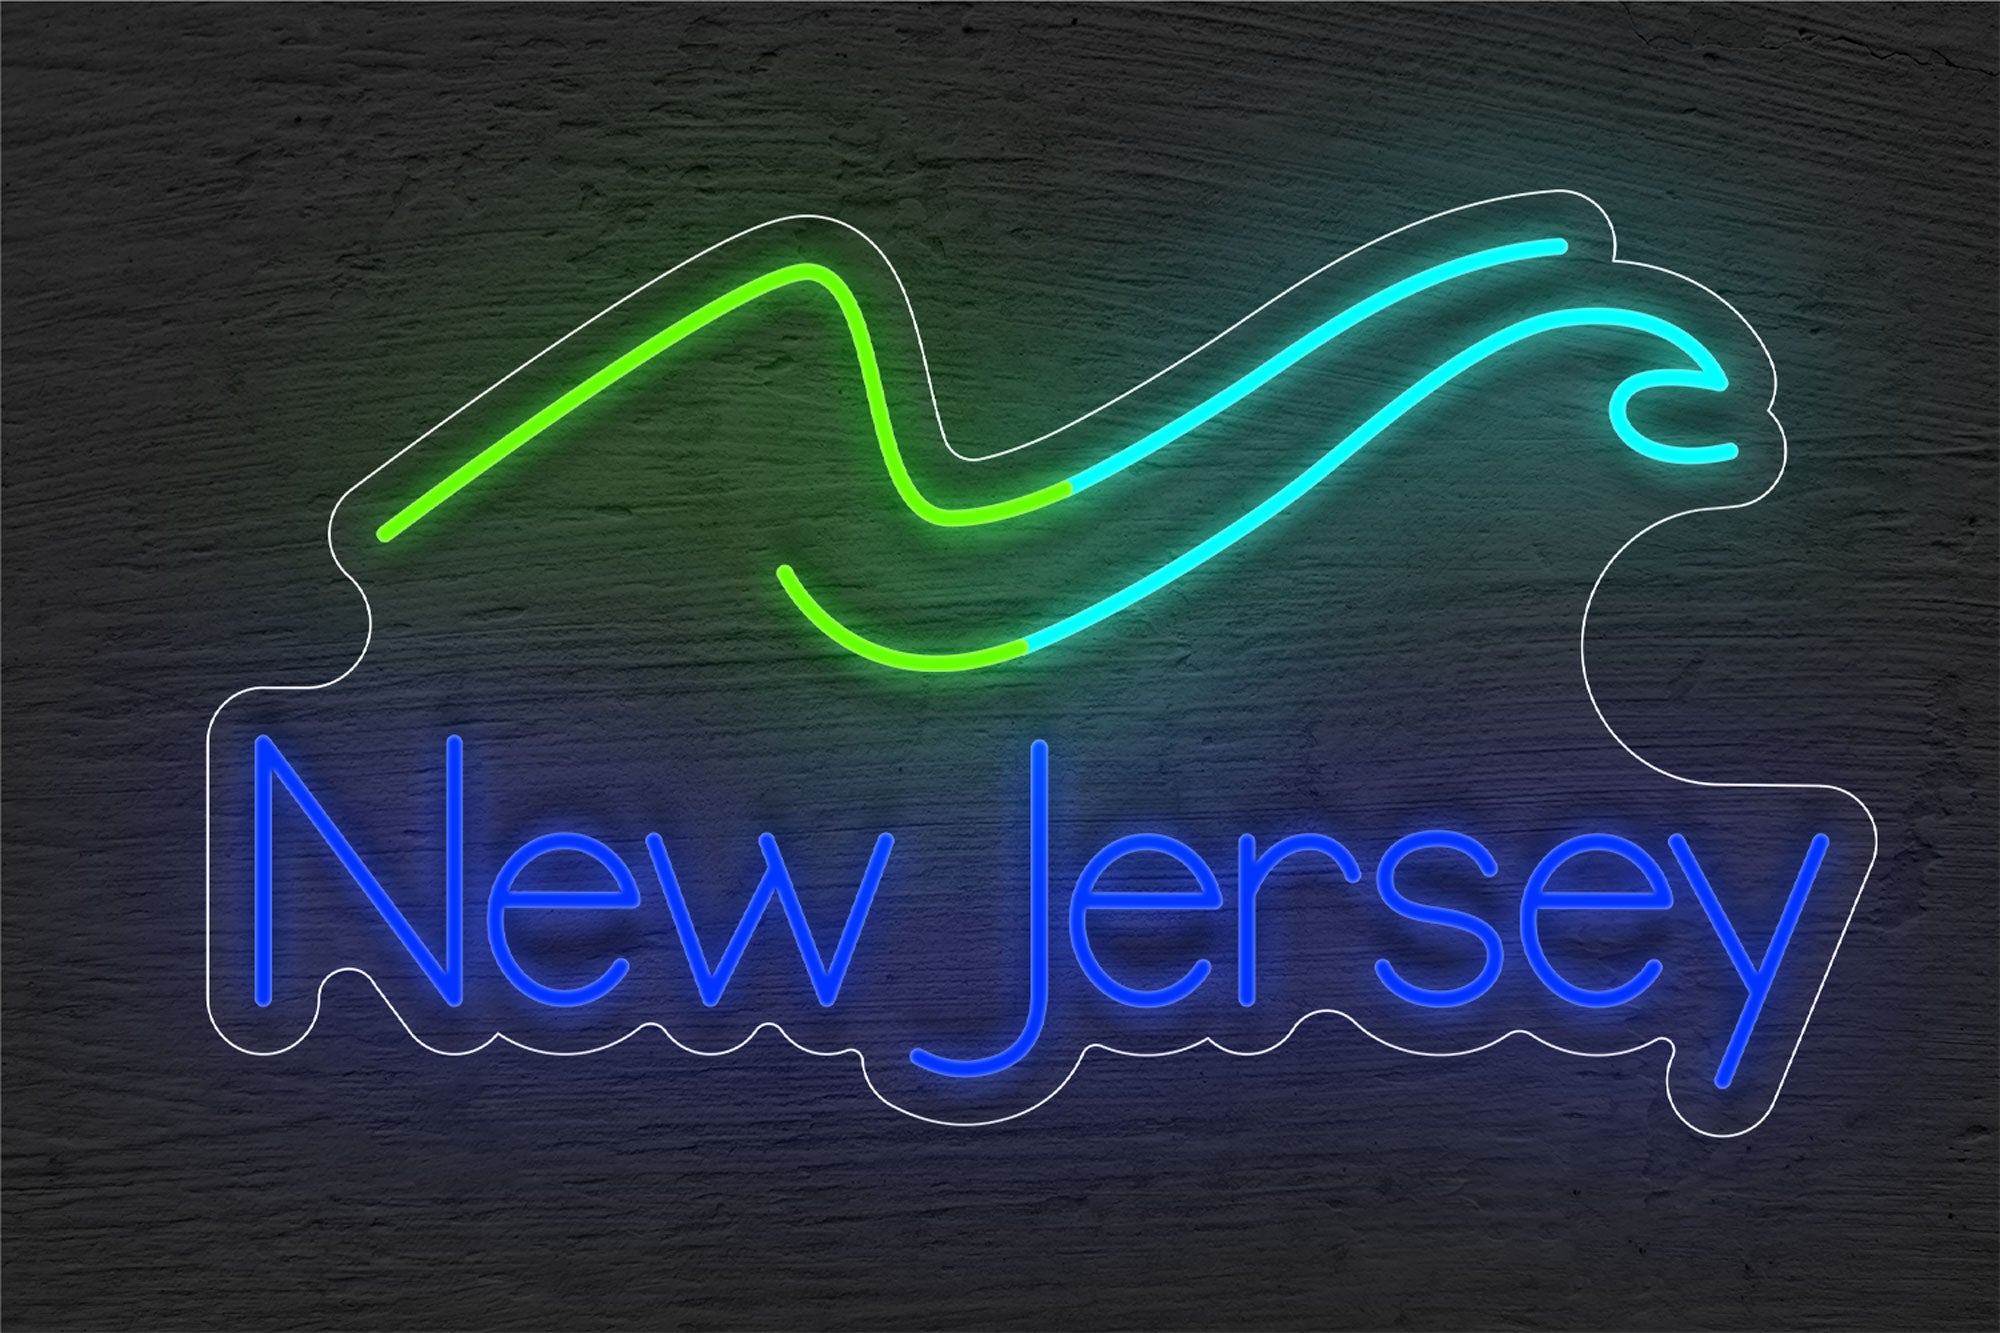 New Jersey with Logo LED Neon Sign